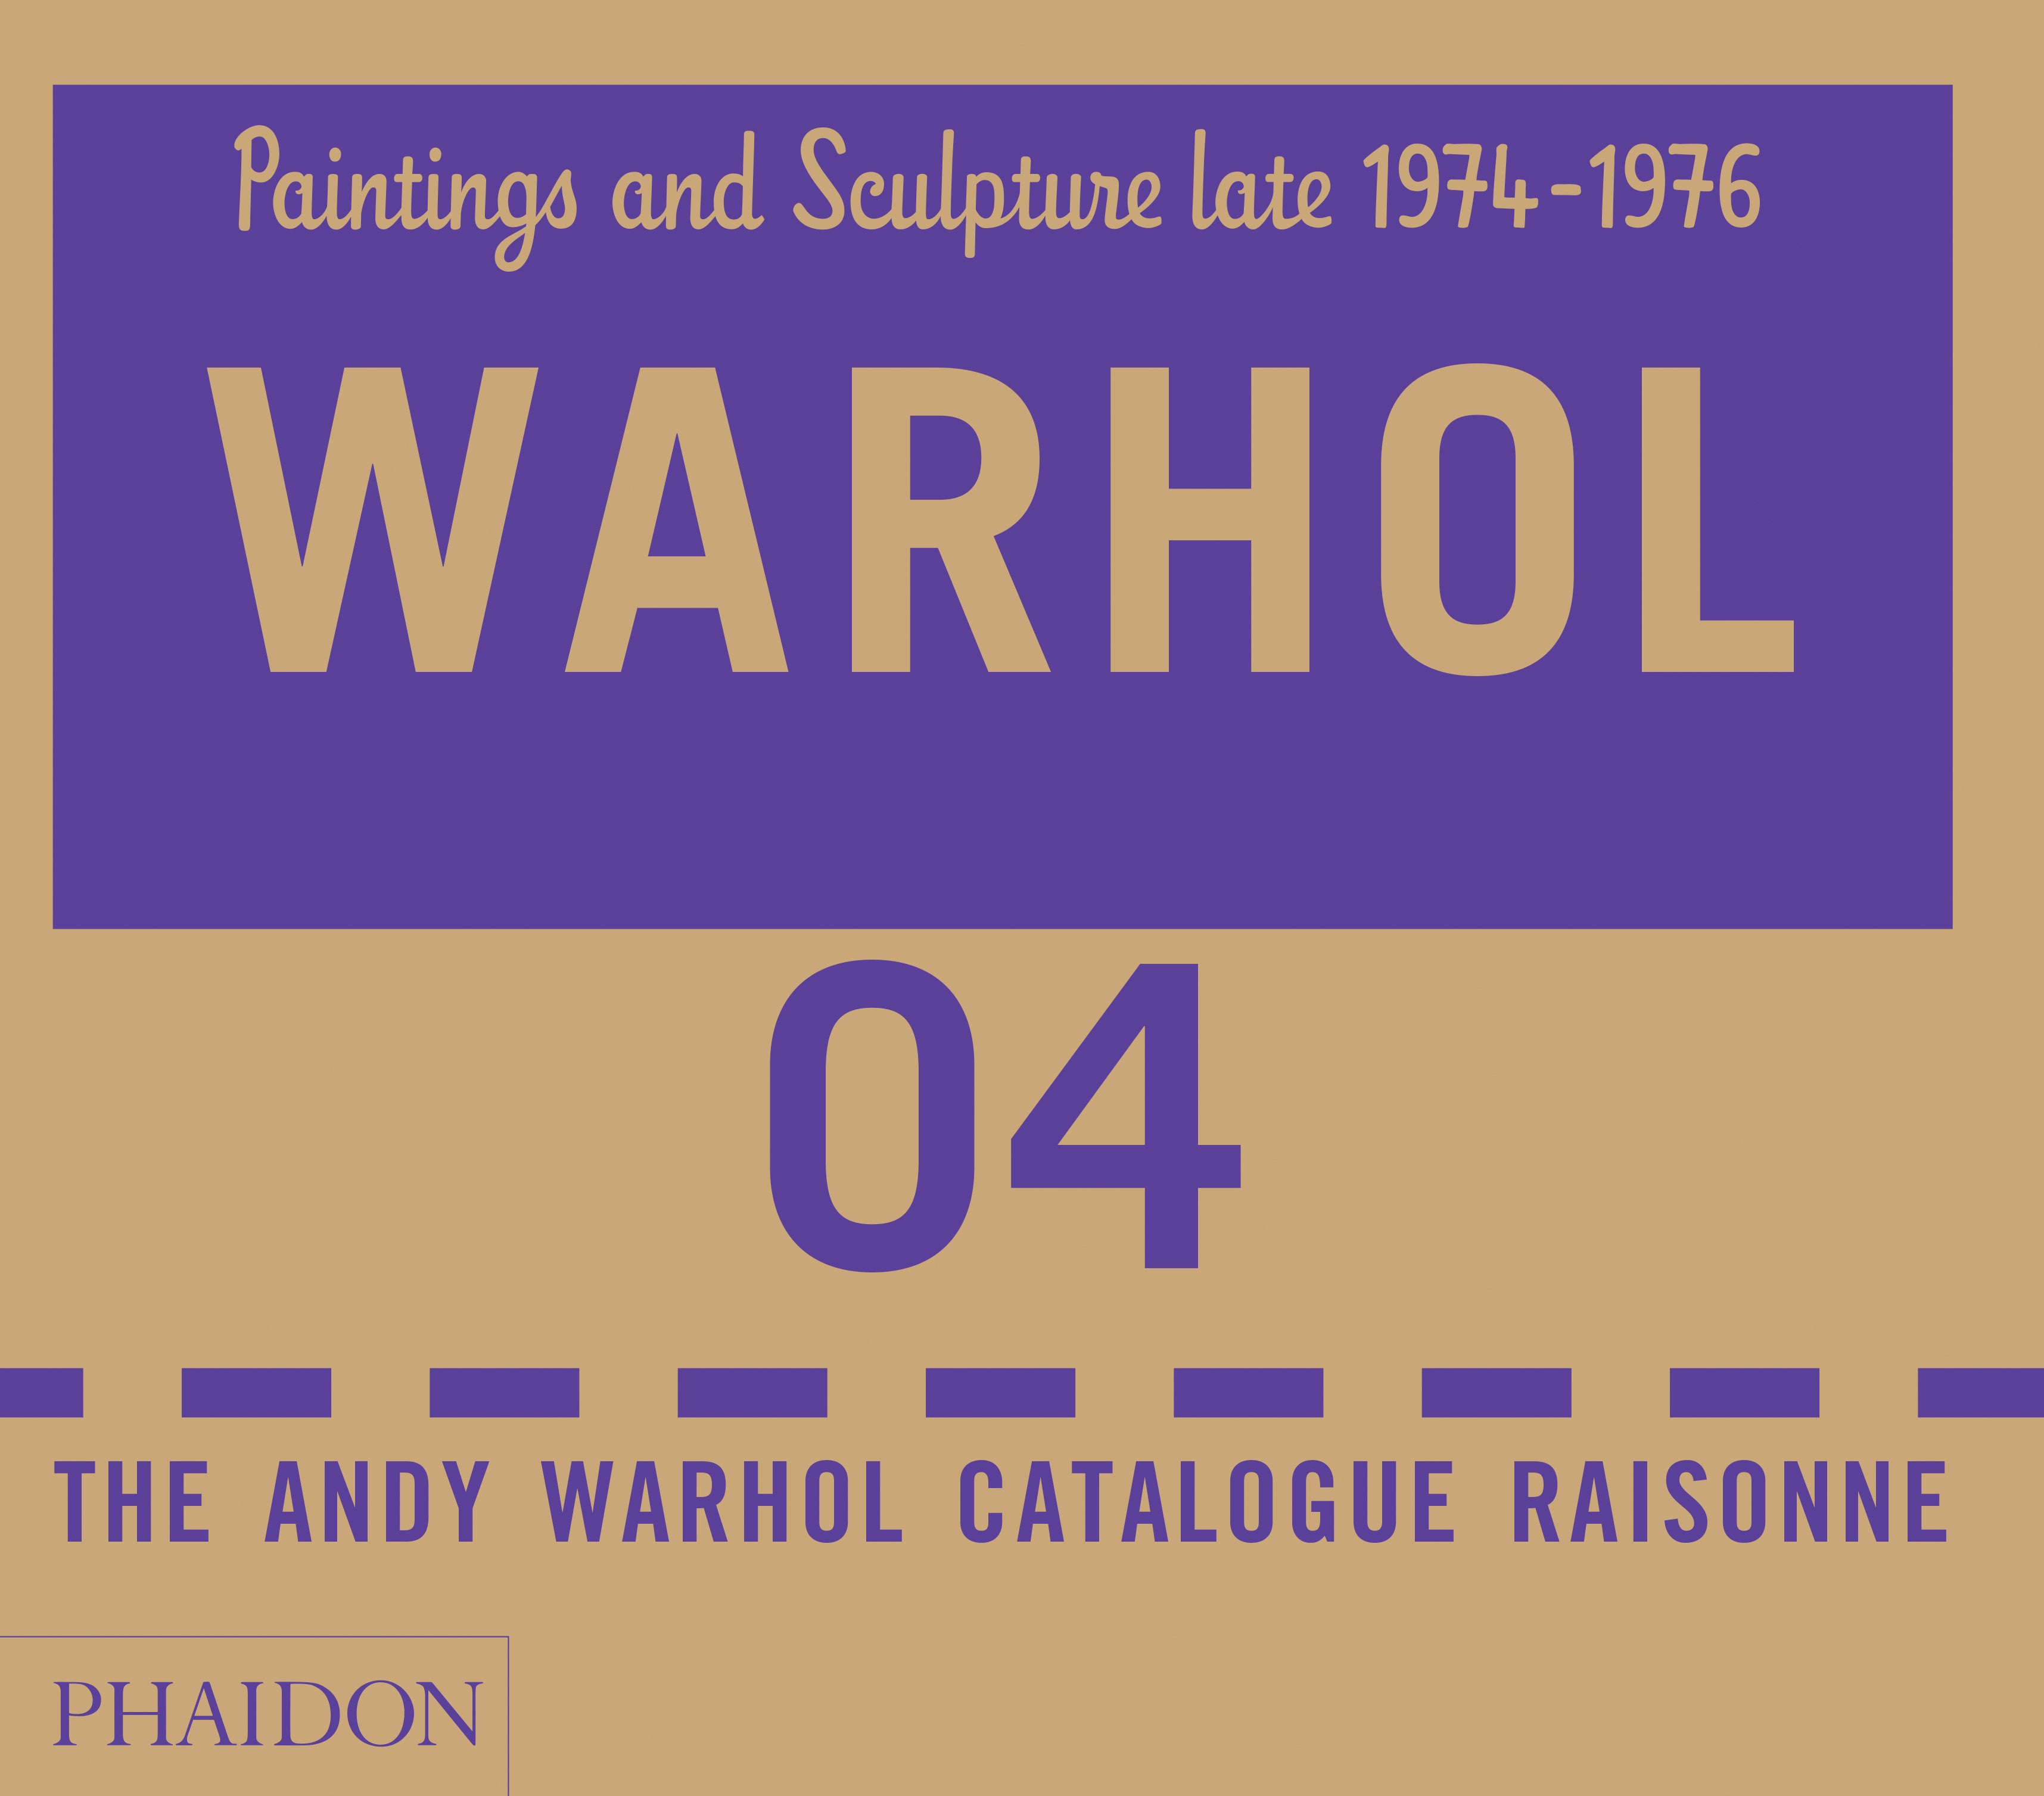 The Andy Warhol Catalogue Raisonné, Paintings and Sculpture, 1974-1976 Volume 4 For Sale